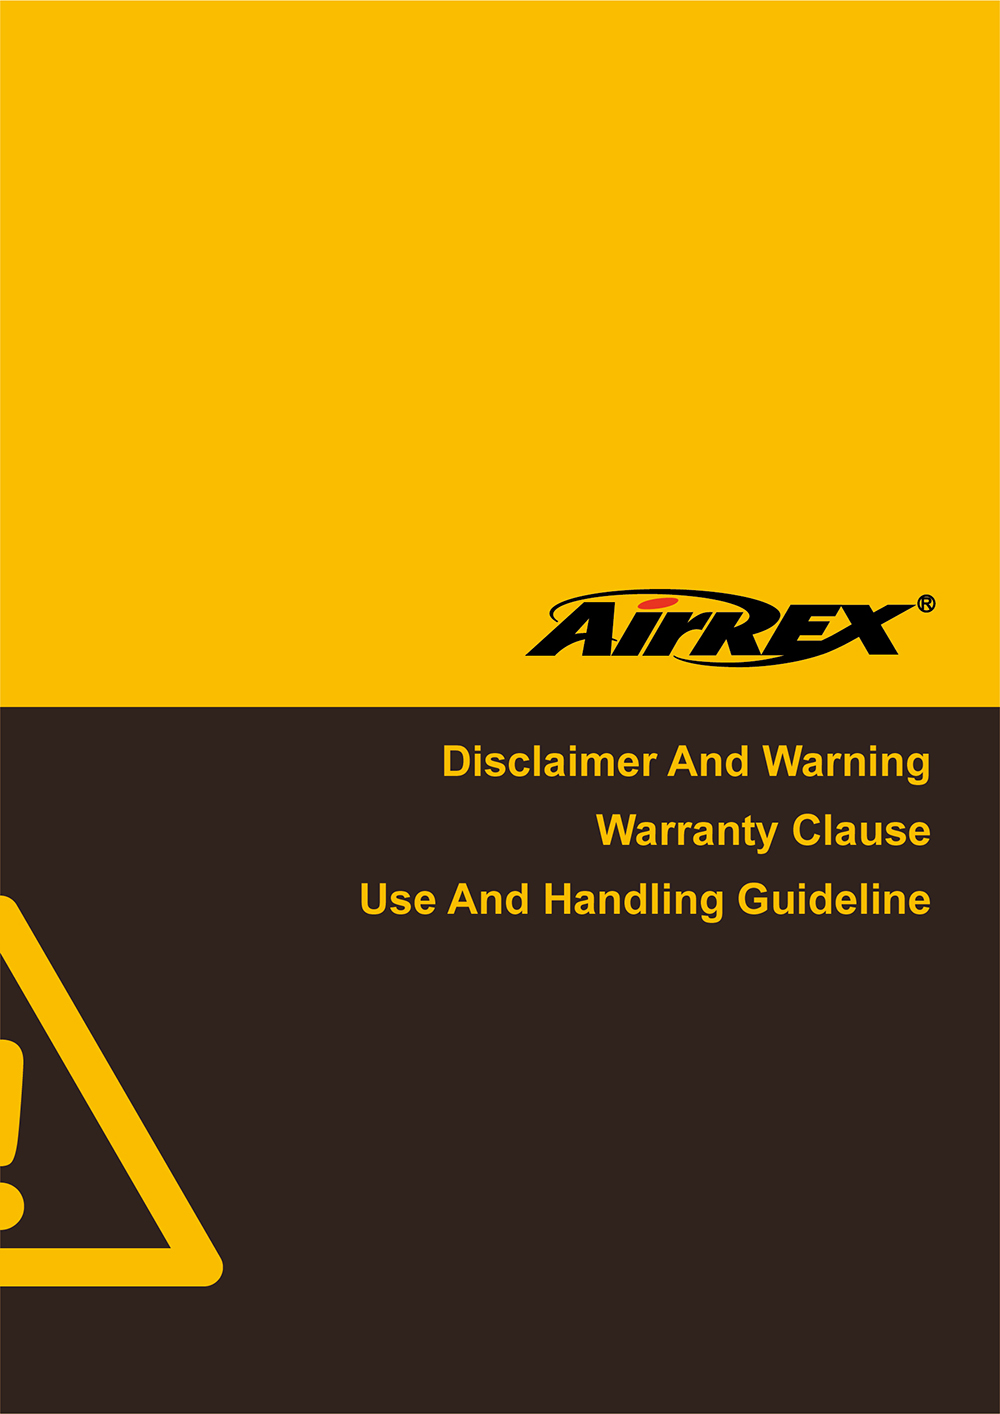 Disclaimer And Warning & Warranty Clause & Use And Handling Guideline (2021.11.02)